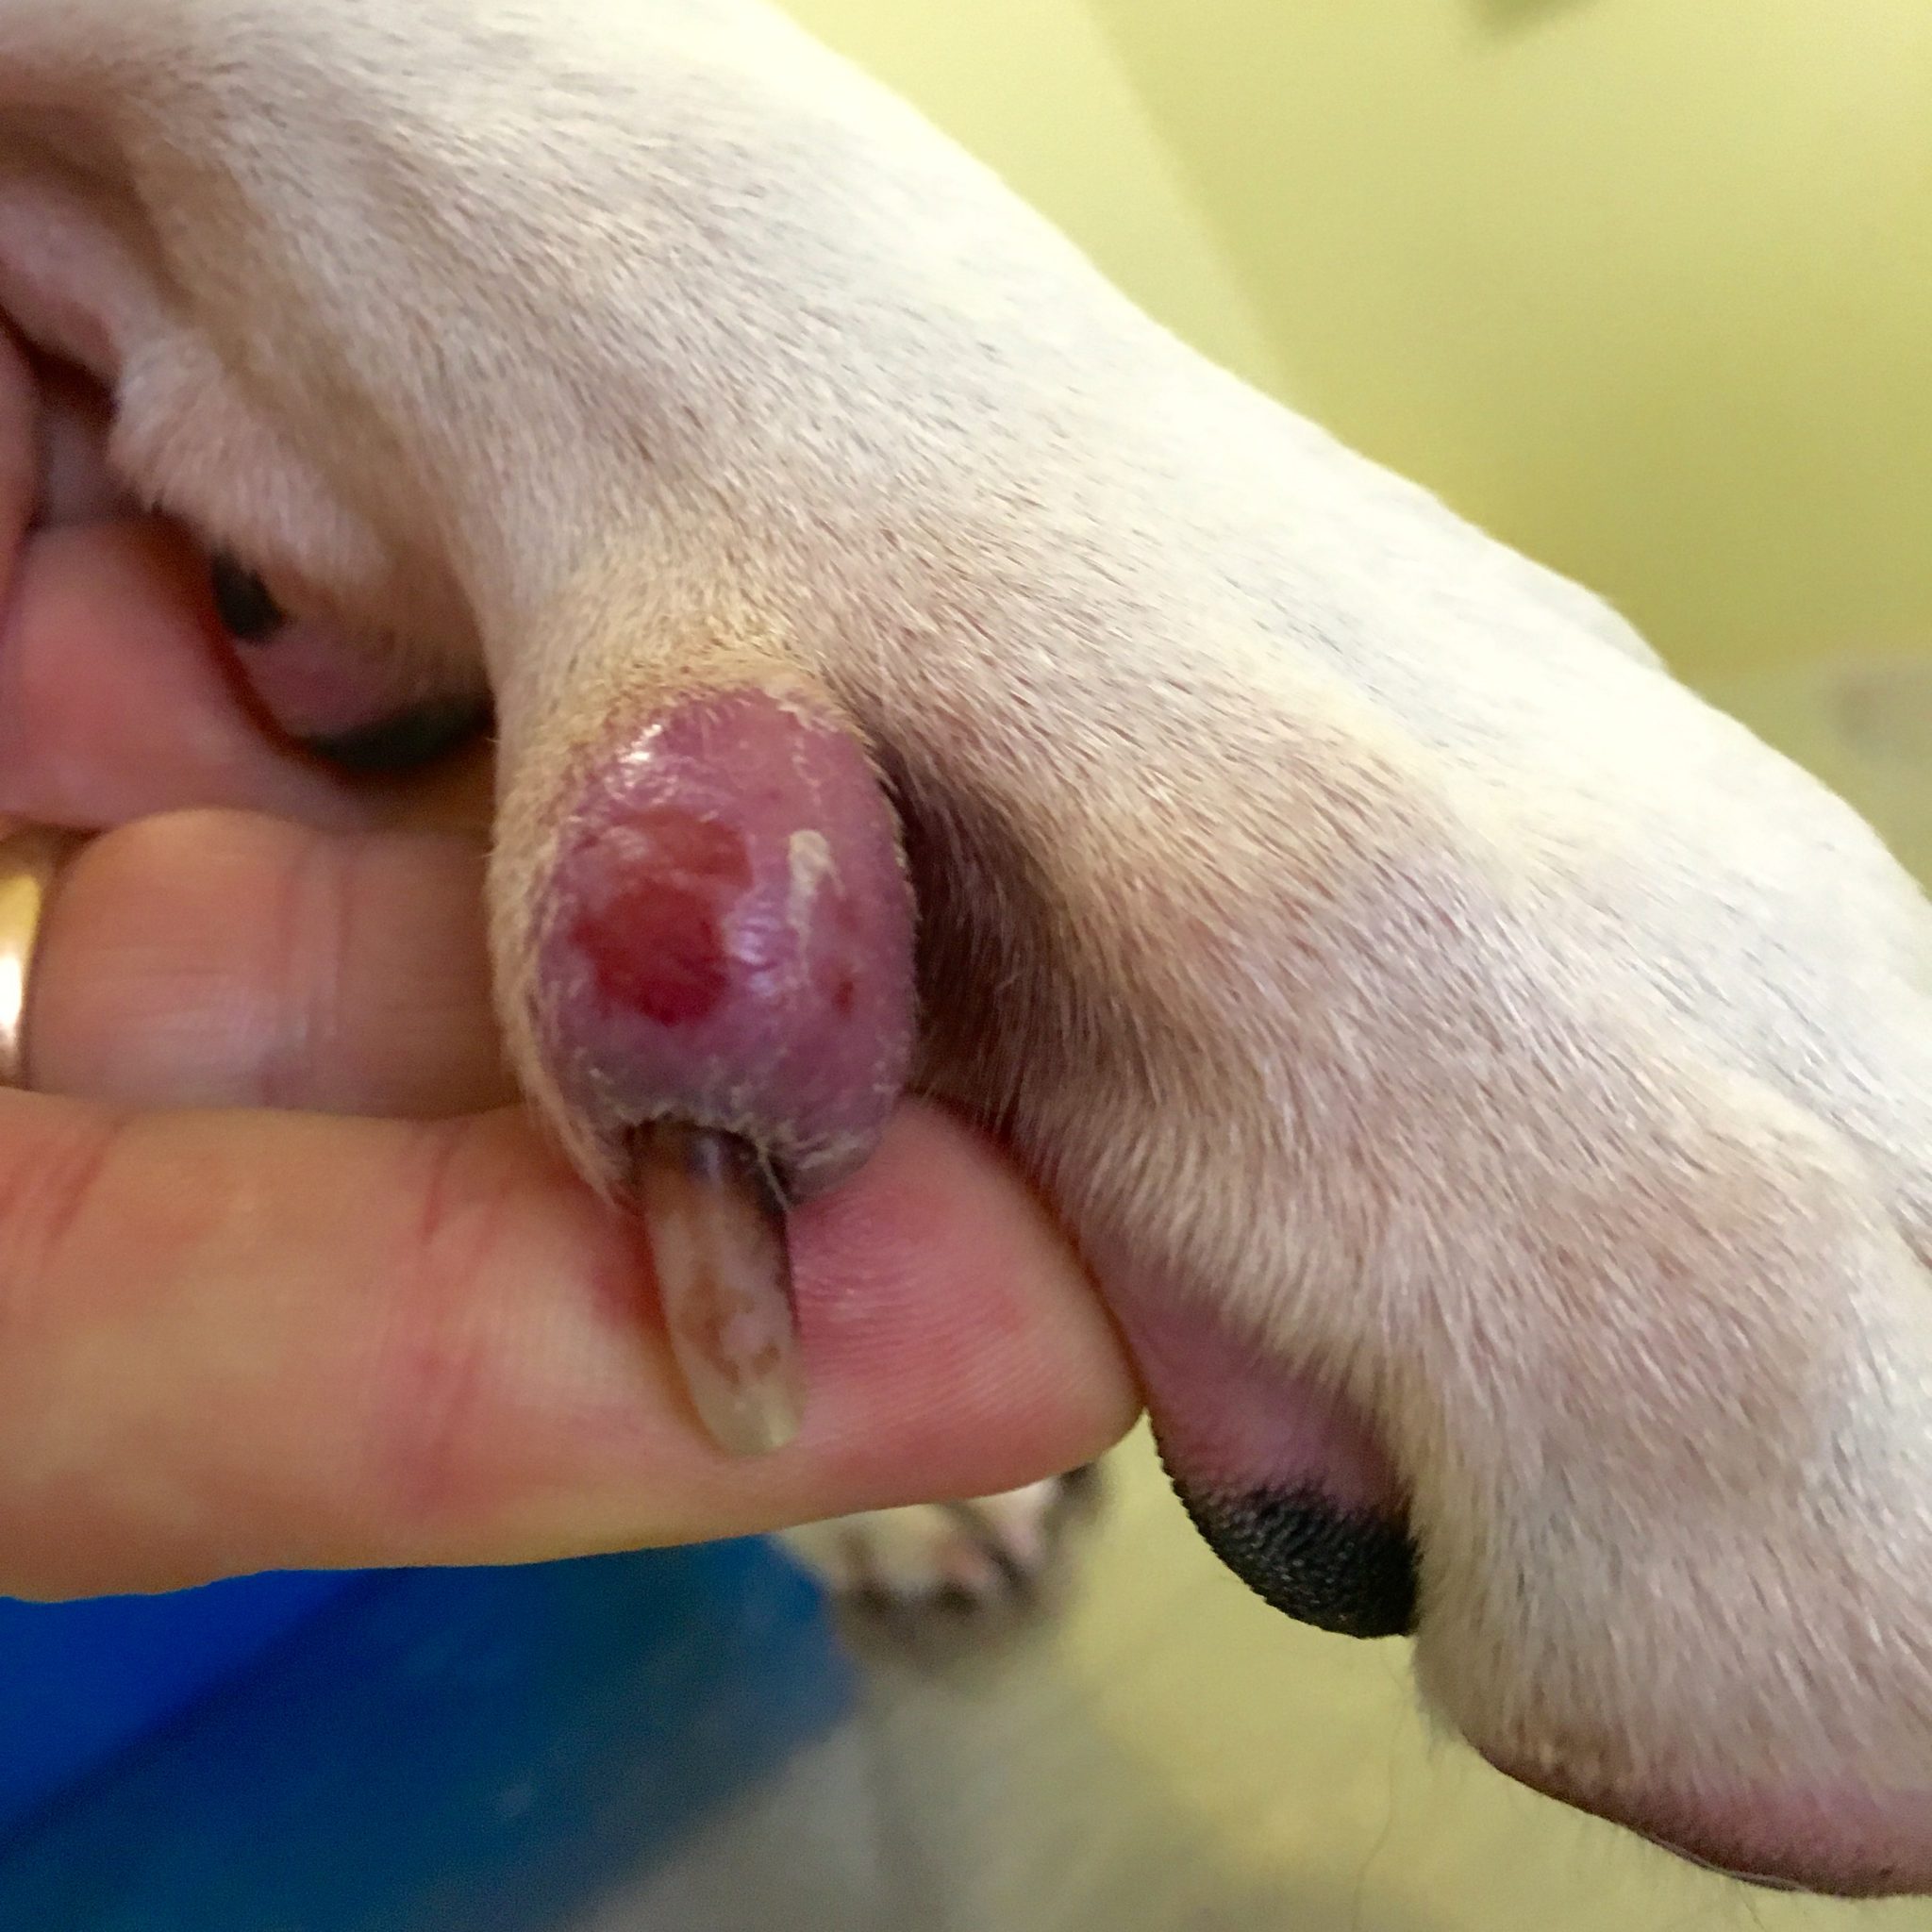 Puppy Licks to a Woman's Feet May Have Caused Serious Skin Infection